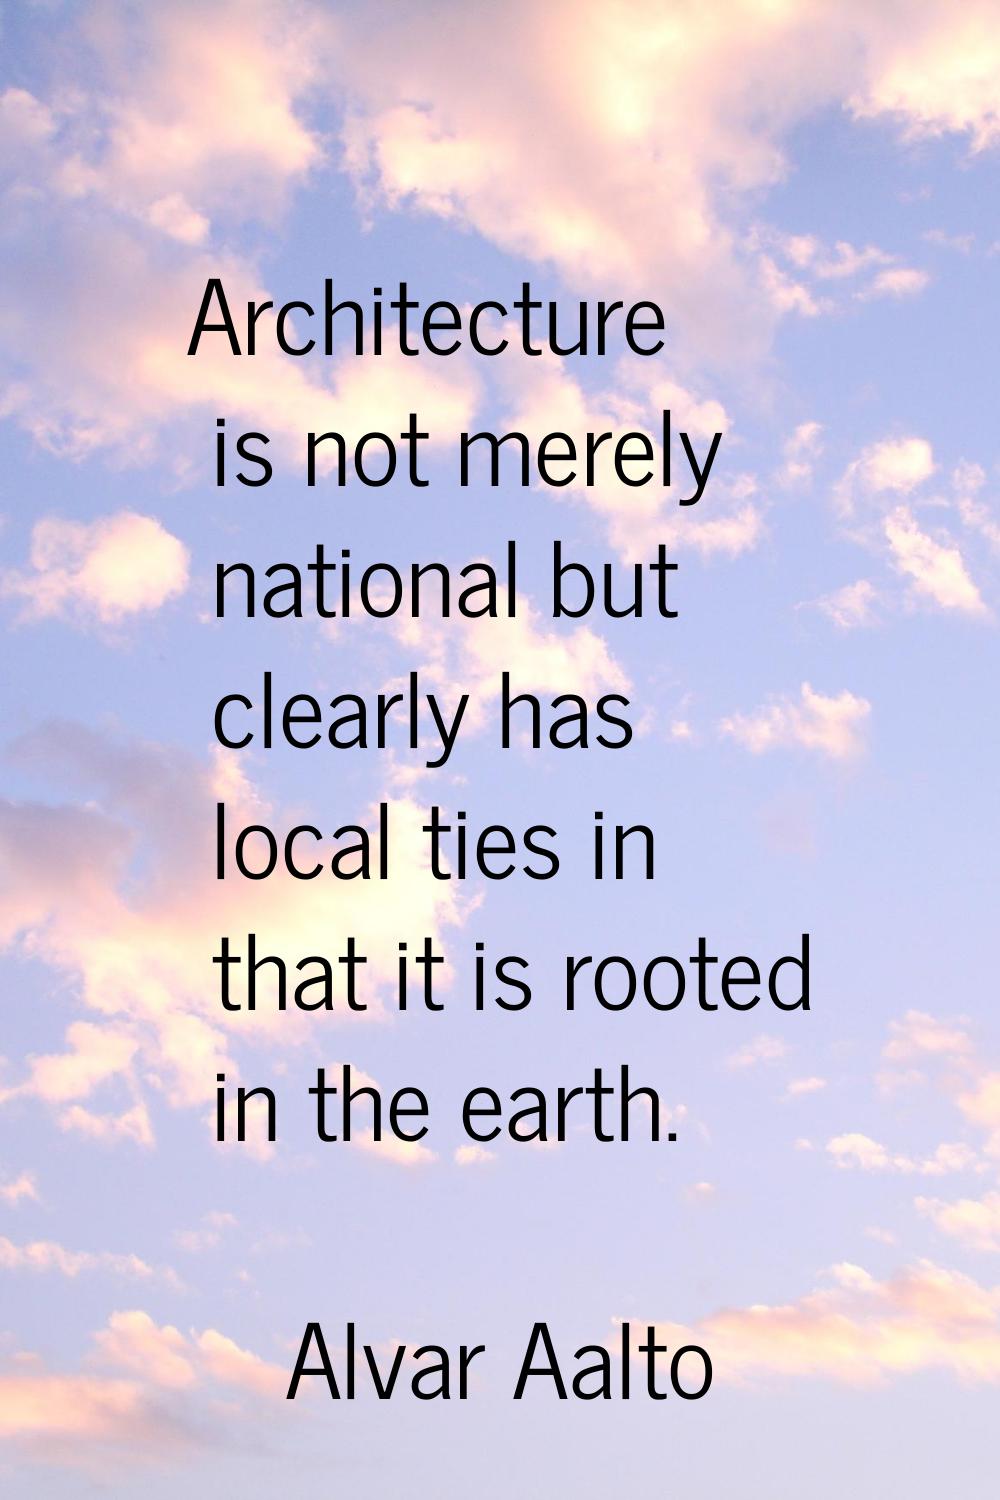 Architecture is not merely national but clearly has local ties in that it is rooted in the earth.